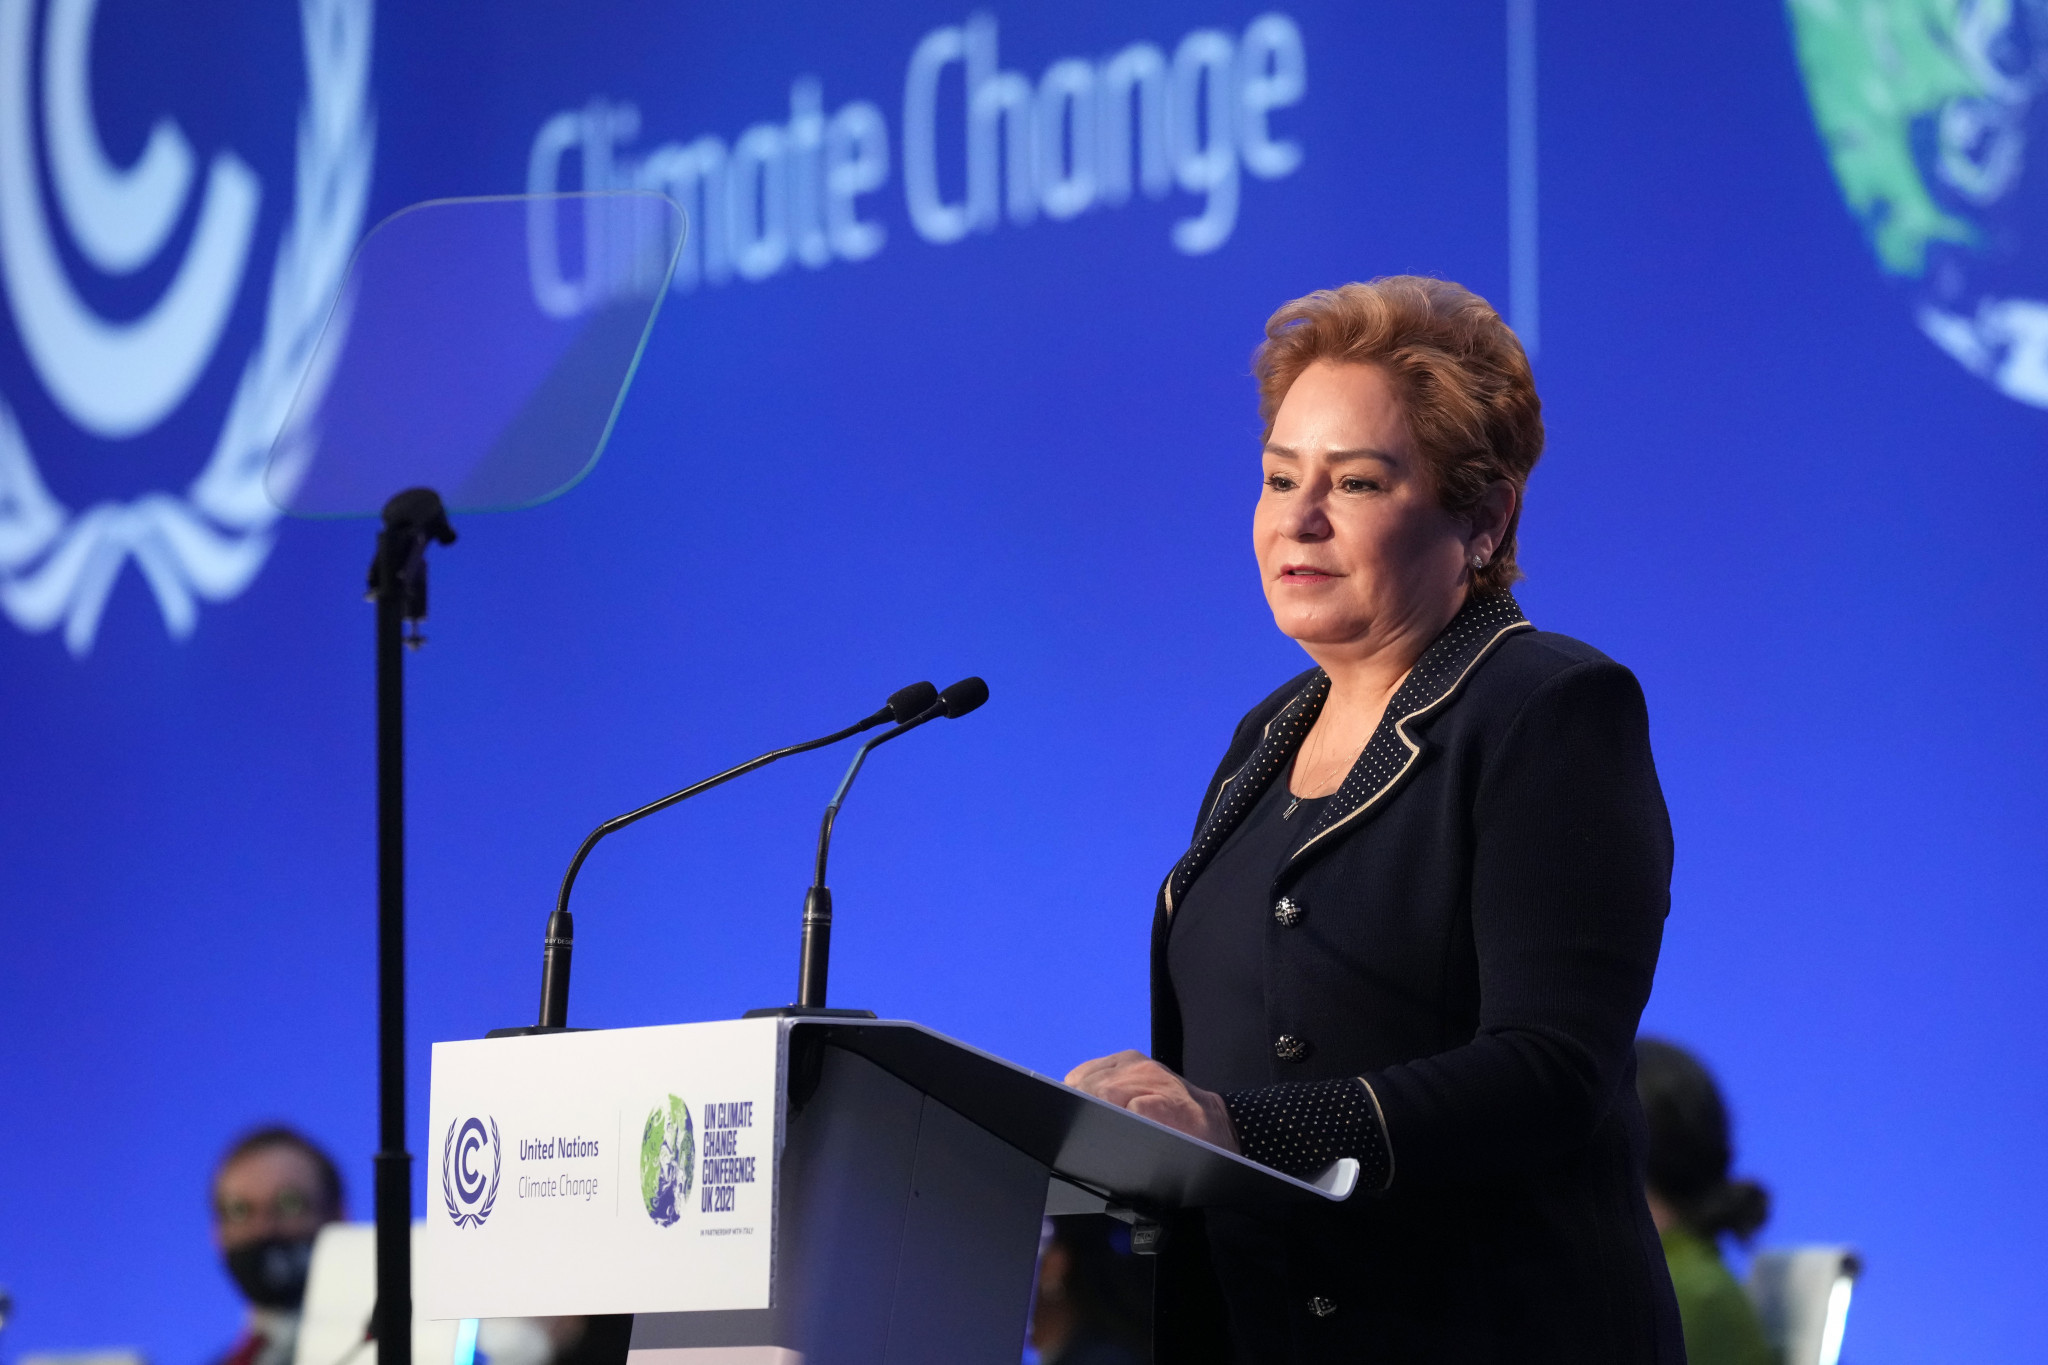 Sports for Climate Action Framework members pledge "net-zero" emissions by 2040 as FIFA launches Climate Strategy